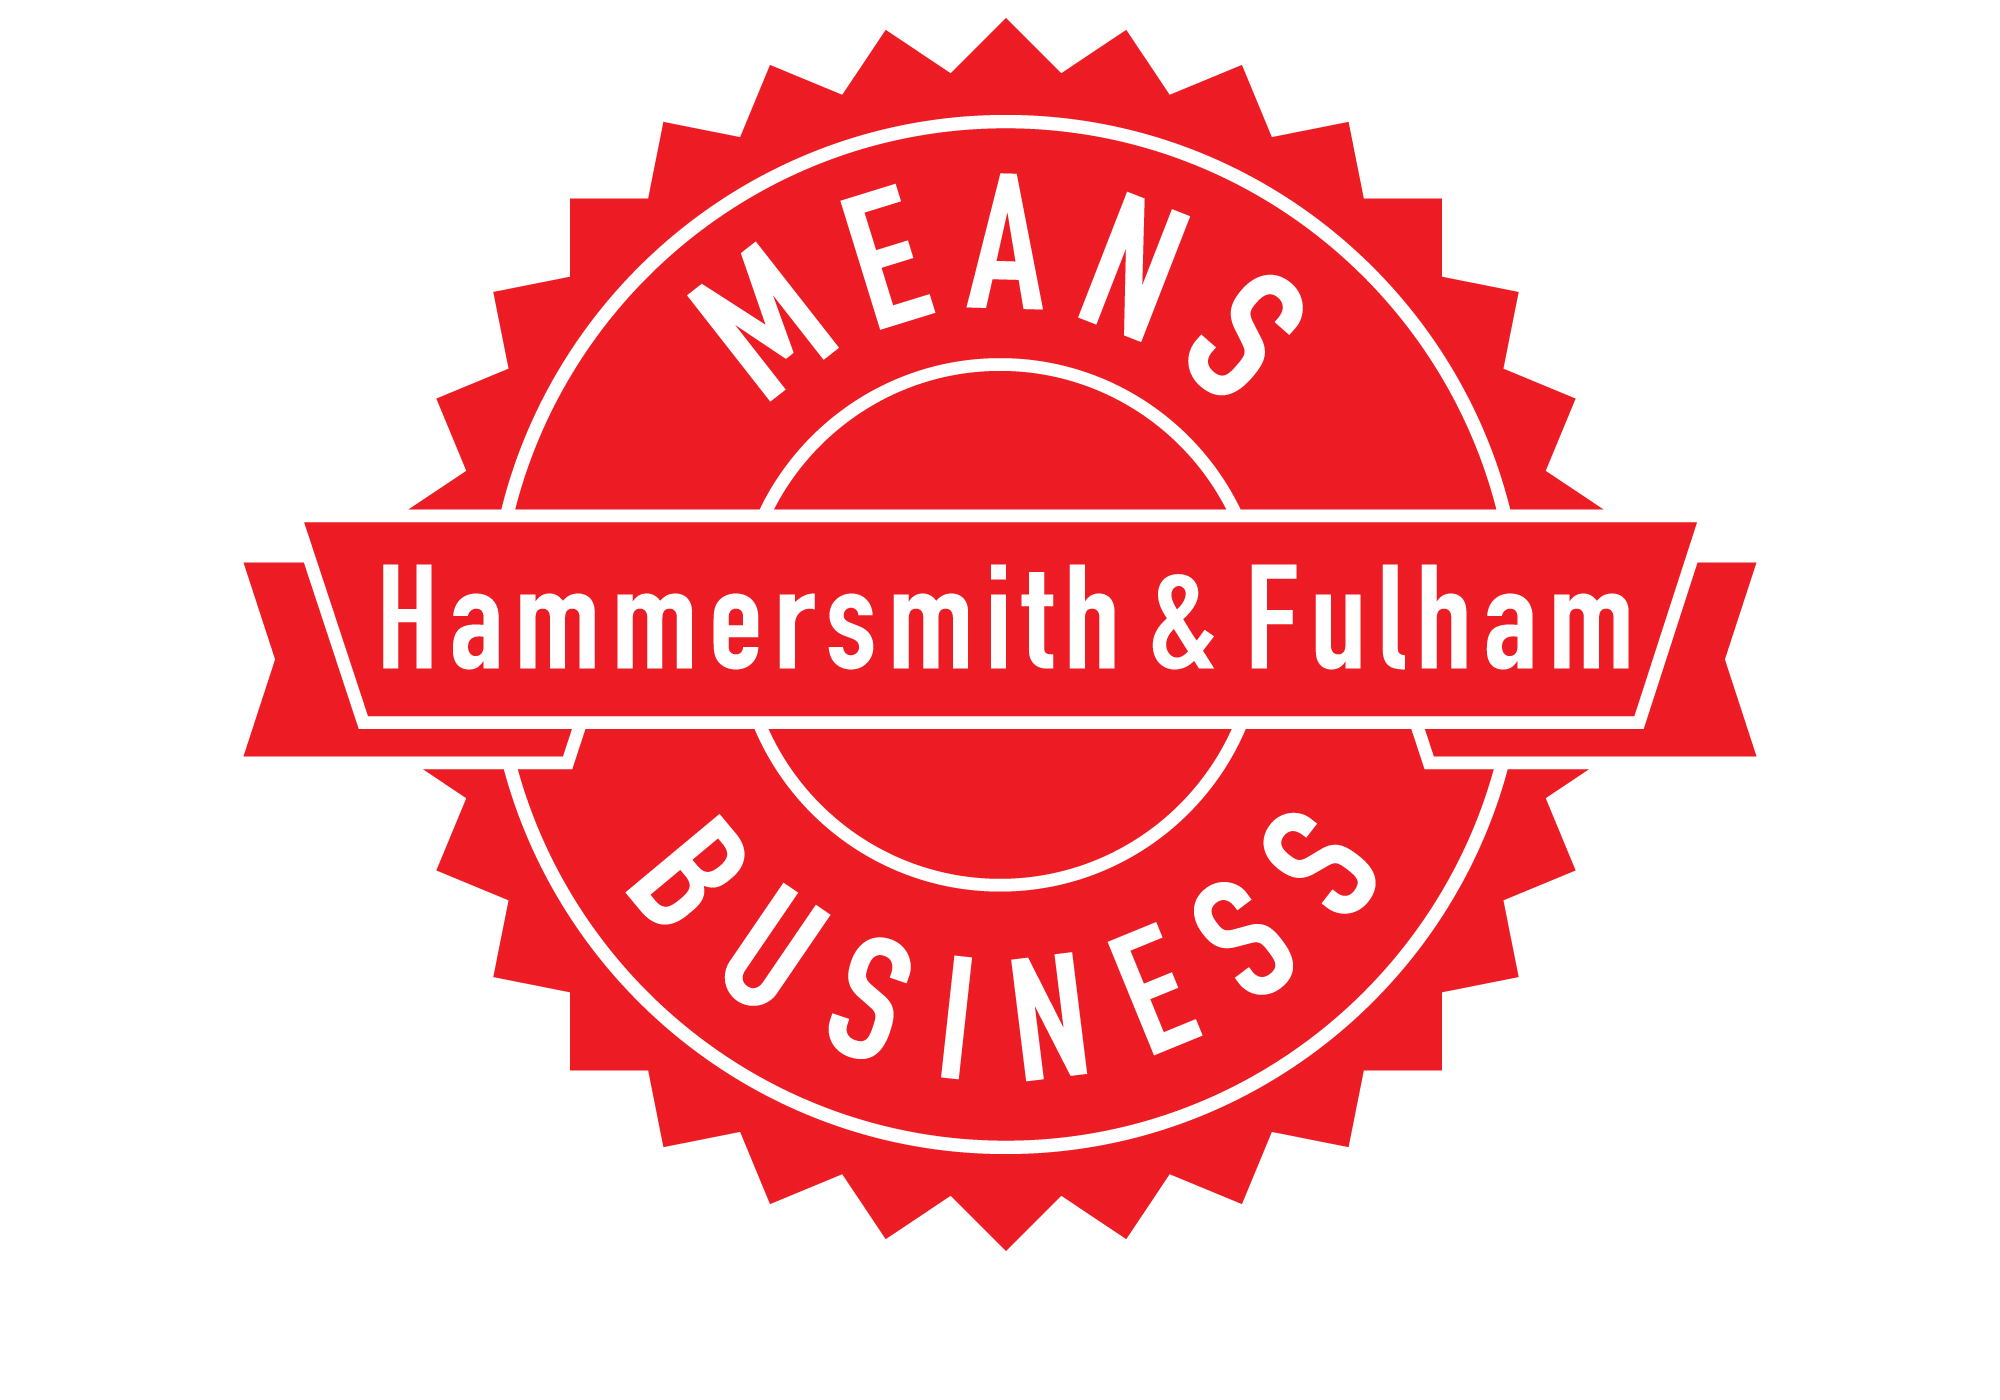 H&F Means Business logo